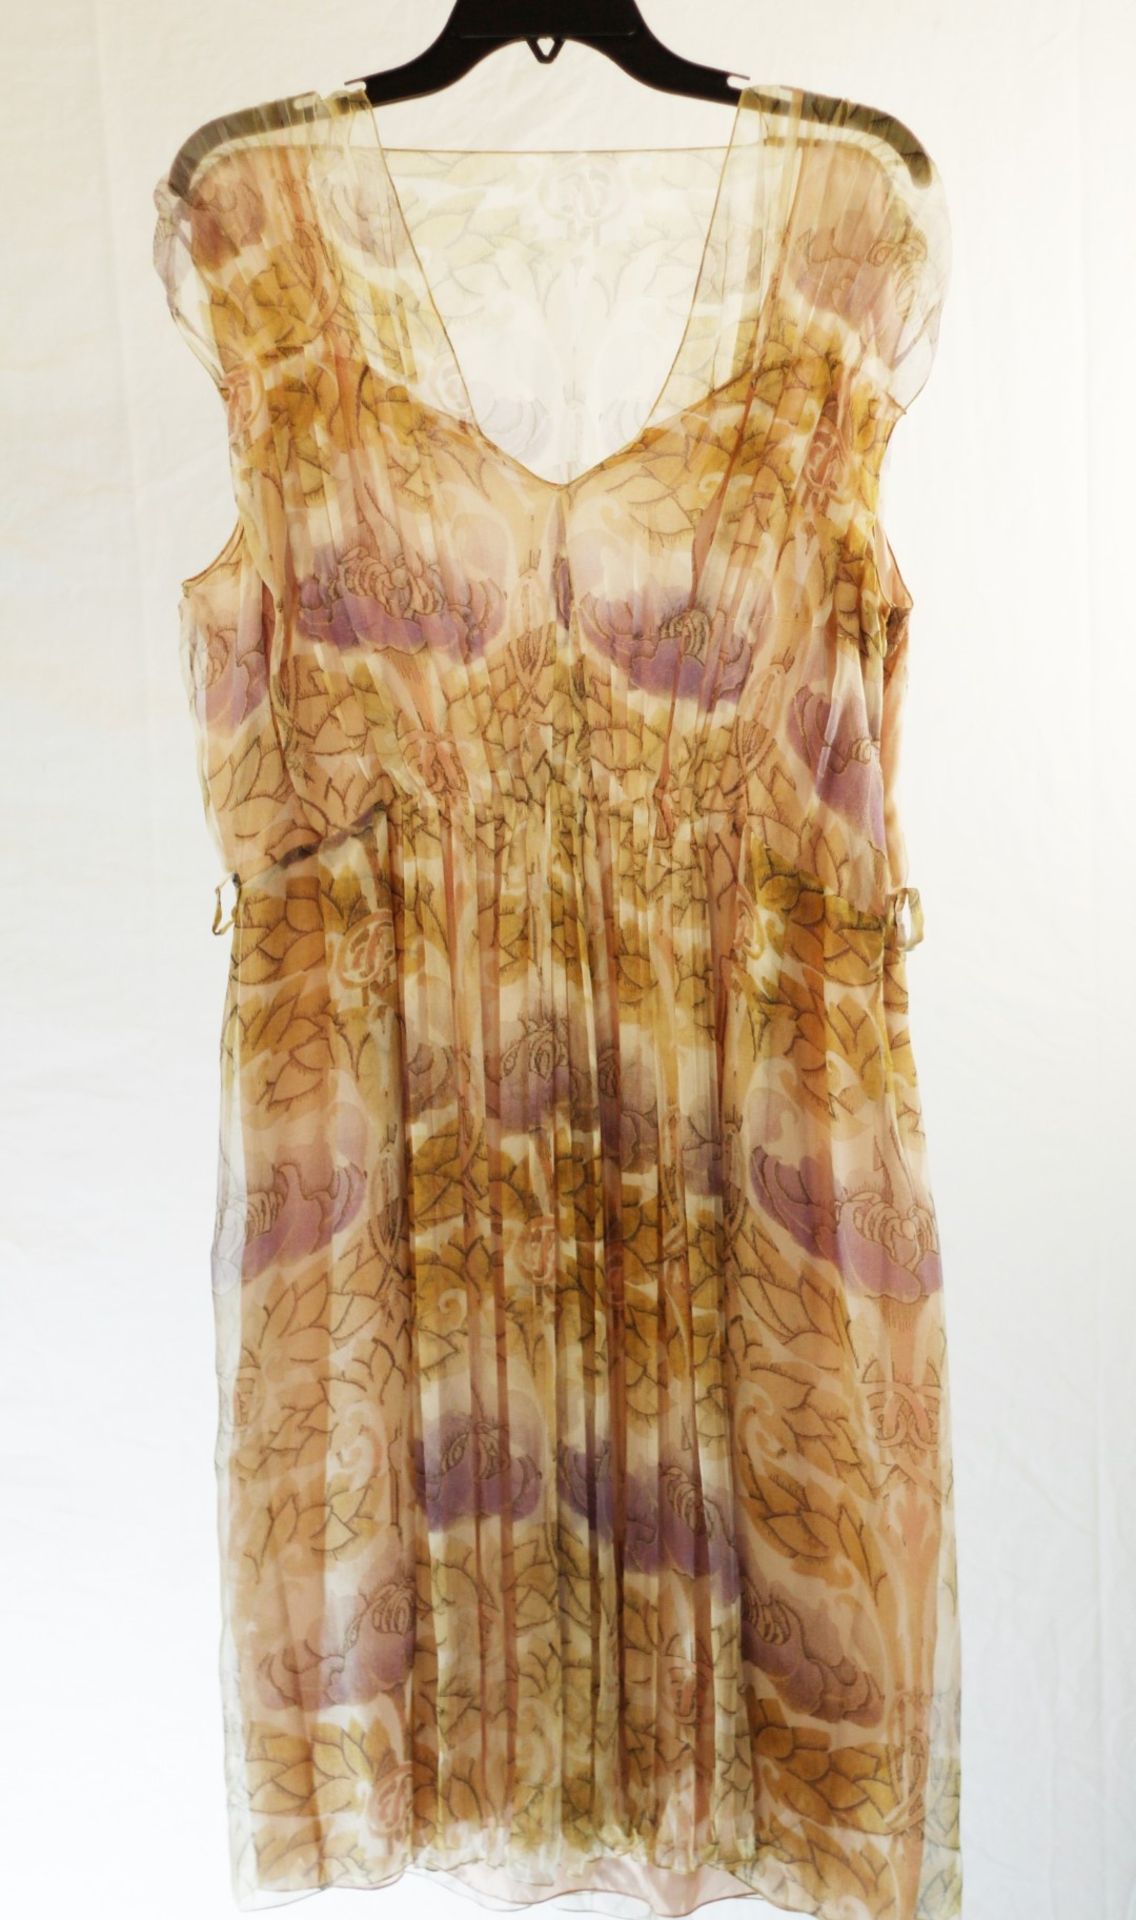 1 x Alberta Ferretti Dusted Rose Dress - Size: 16 - Material: 100% Silk - From a High End Clothing